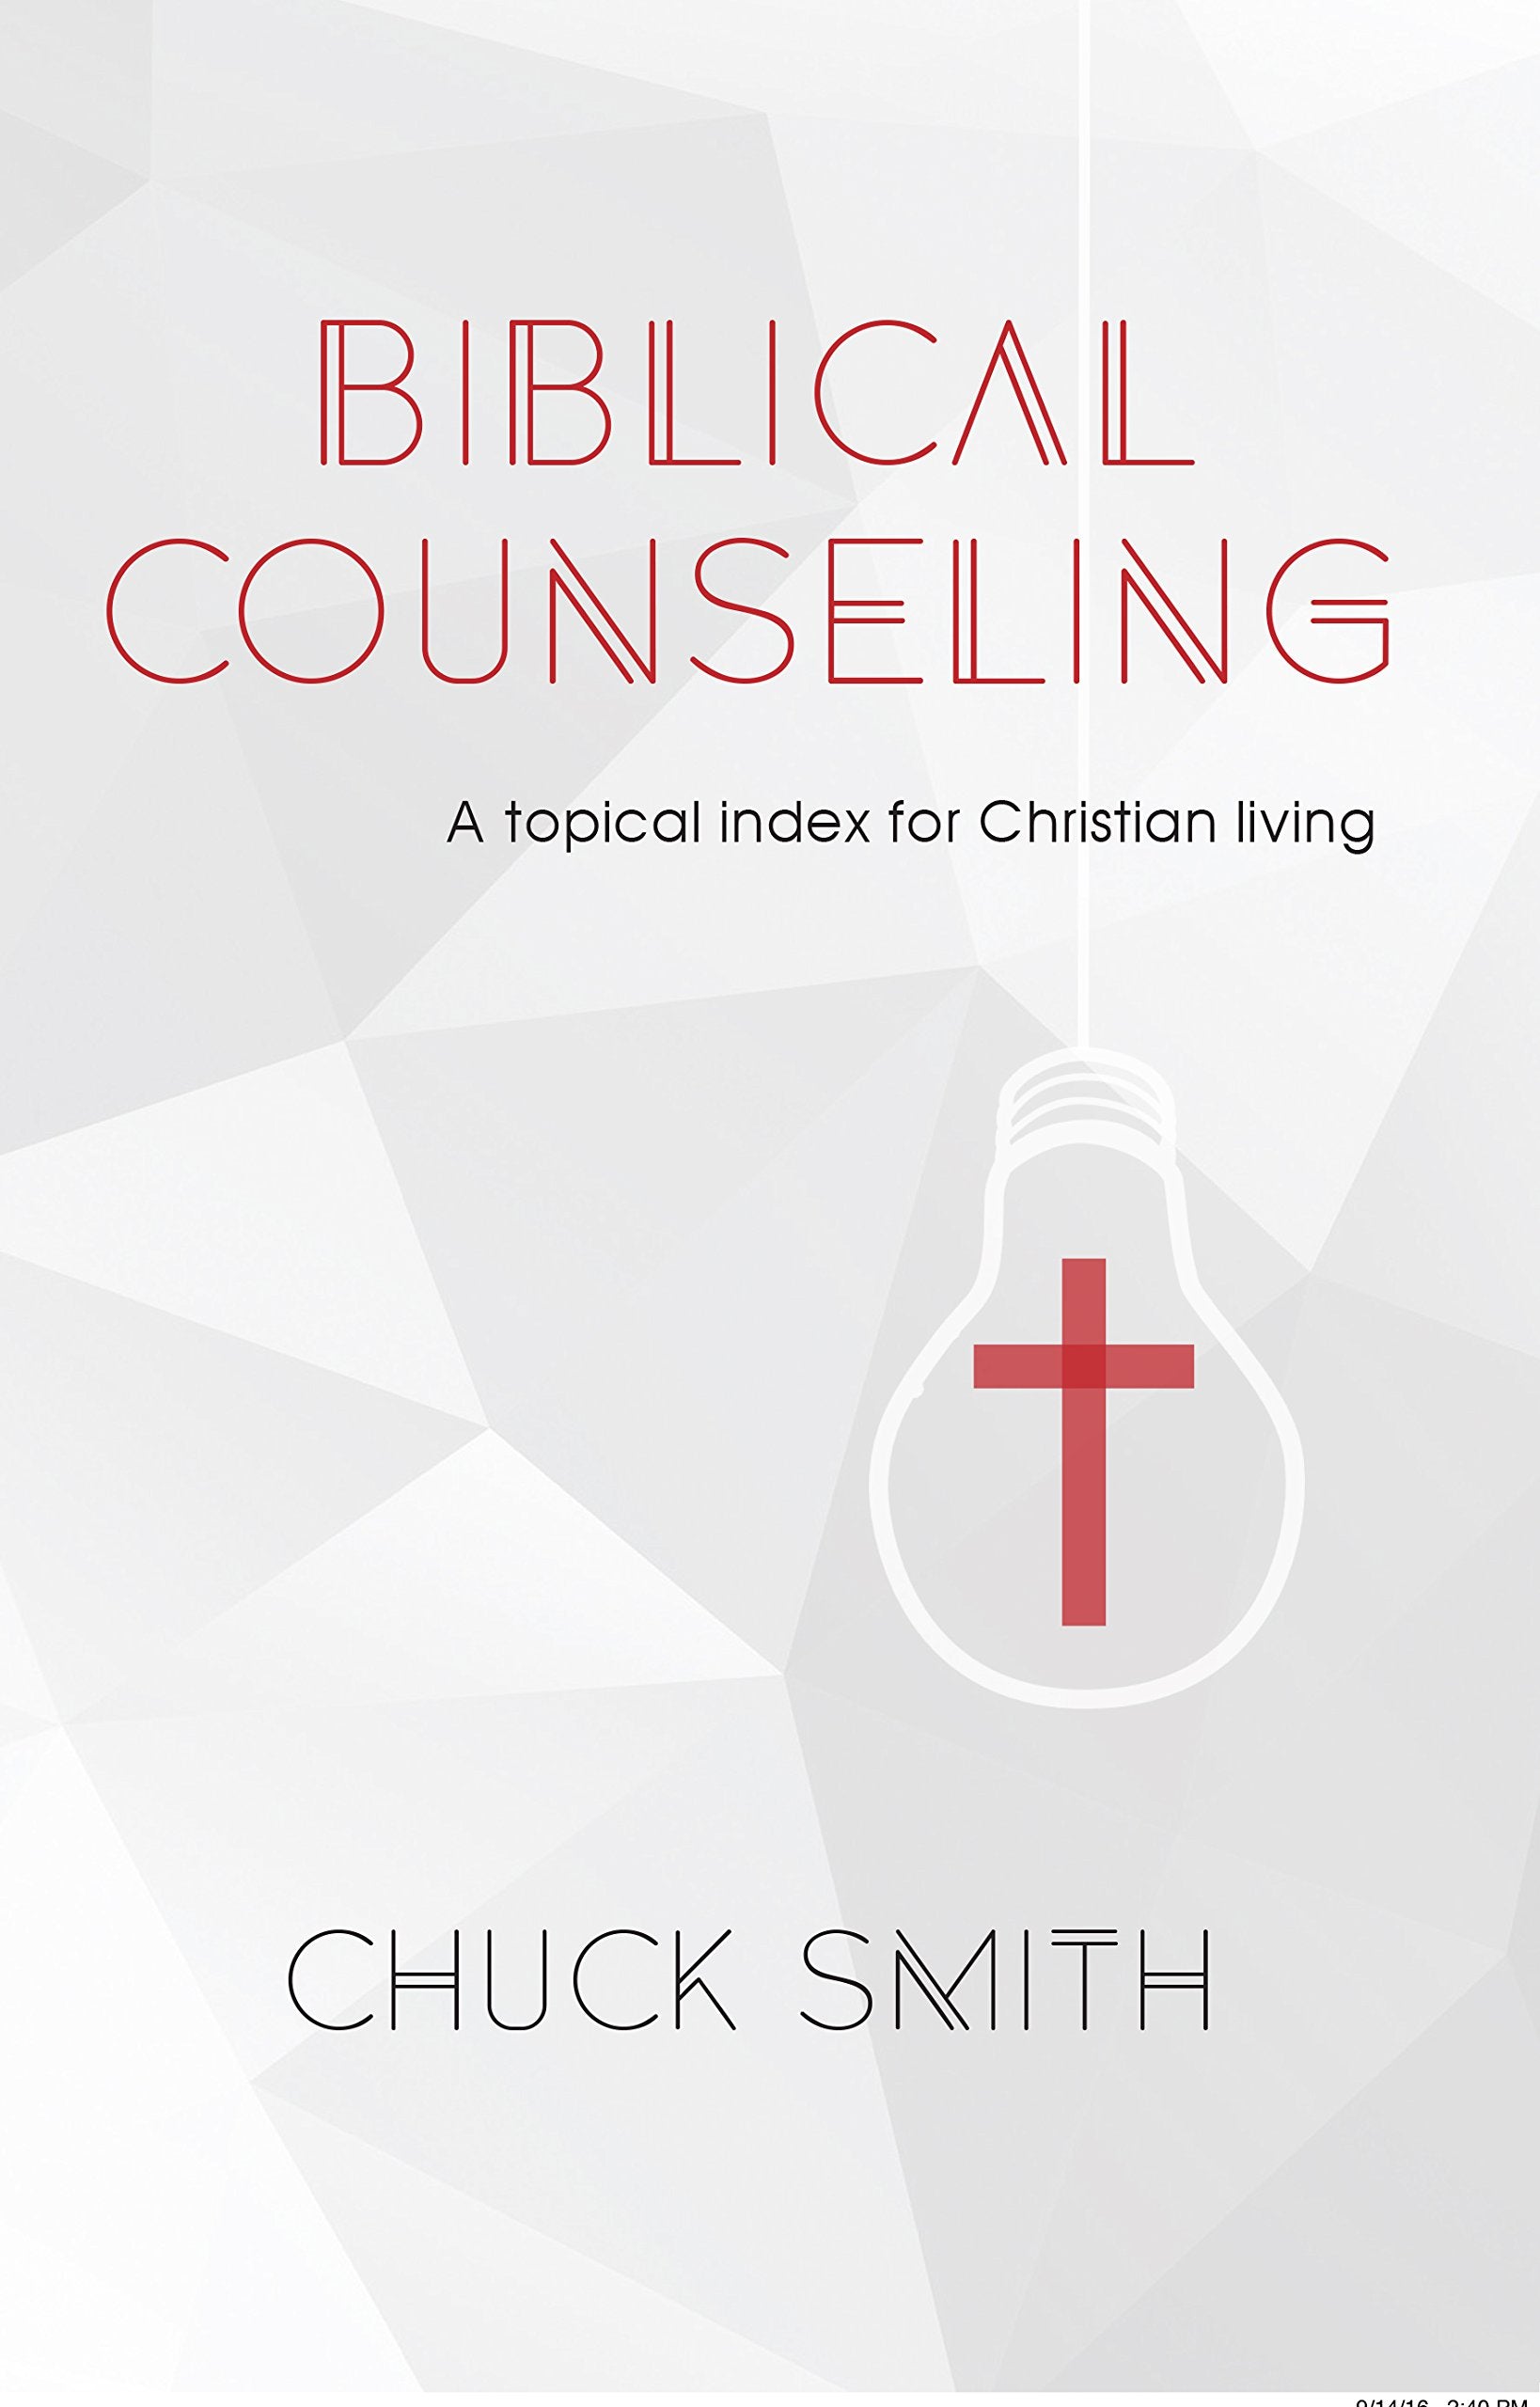 Presented by the Word for Today, Biblical Counseling: A topical index for Christian living, by Pastor Chuck Smith,  is a compilation of over 200 topics such as: depression, suicide, addiction, forgiveness, loneliness, temptation, and many others. 